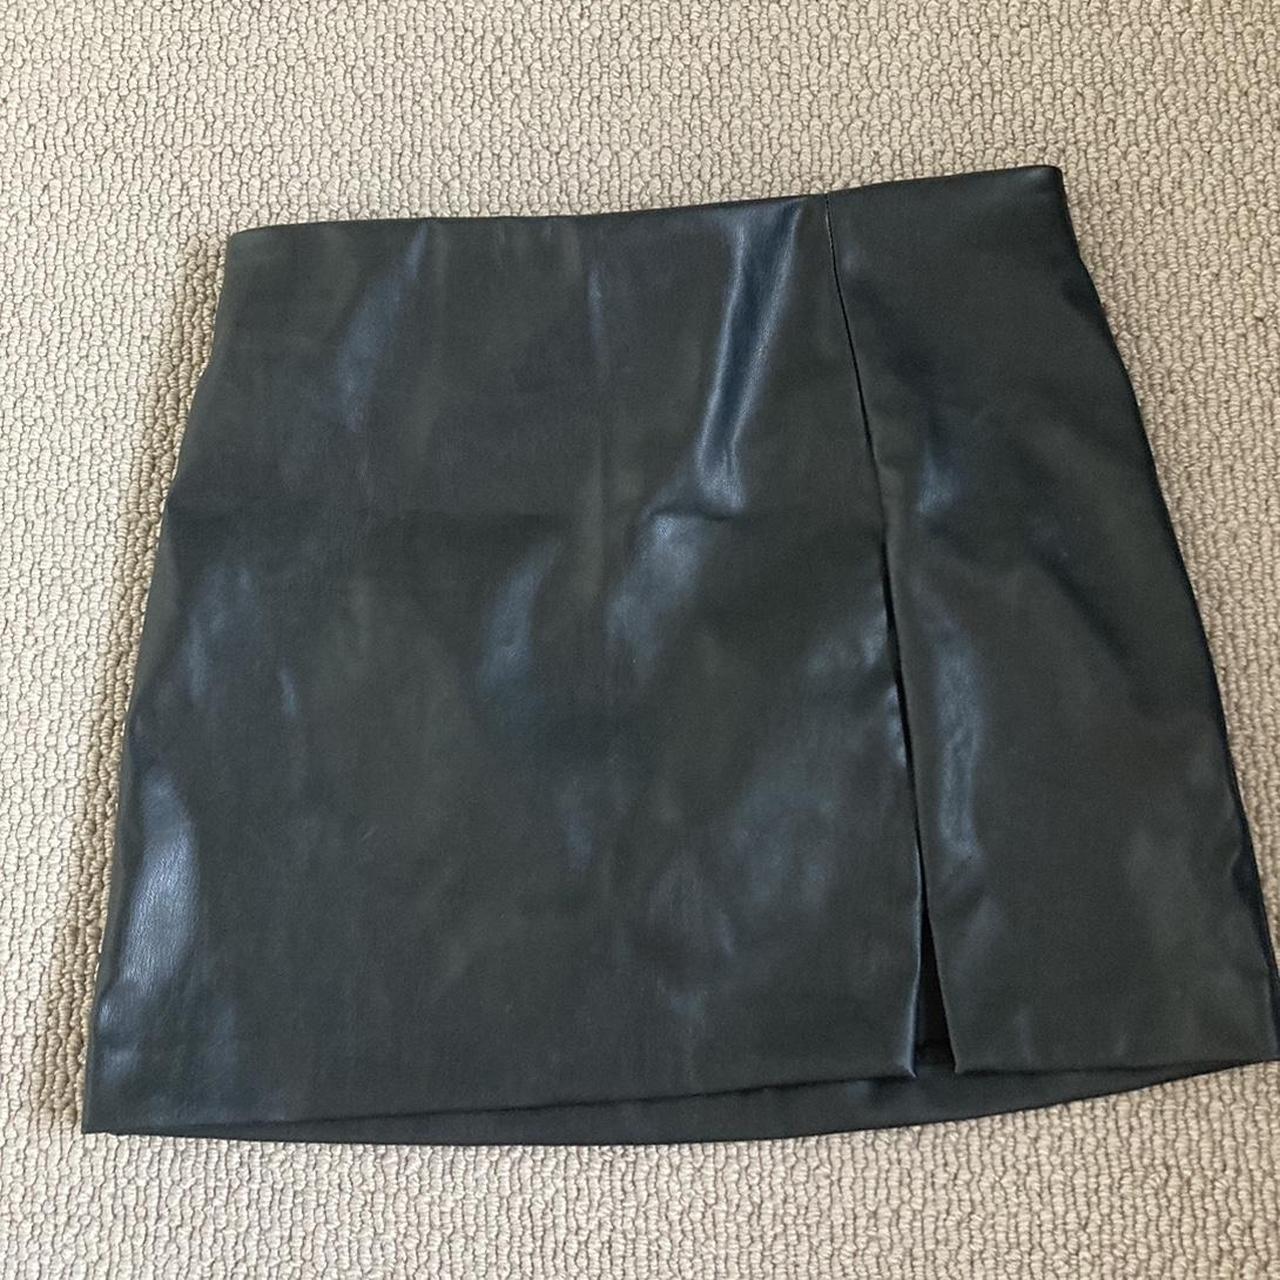 H and m black leather mini skirt with slit Size... - Depop